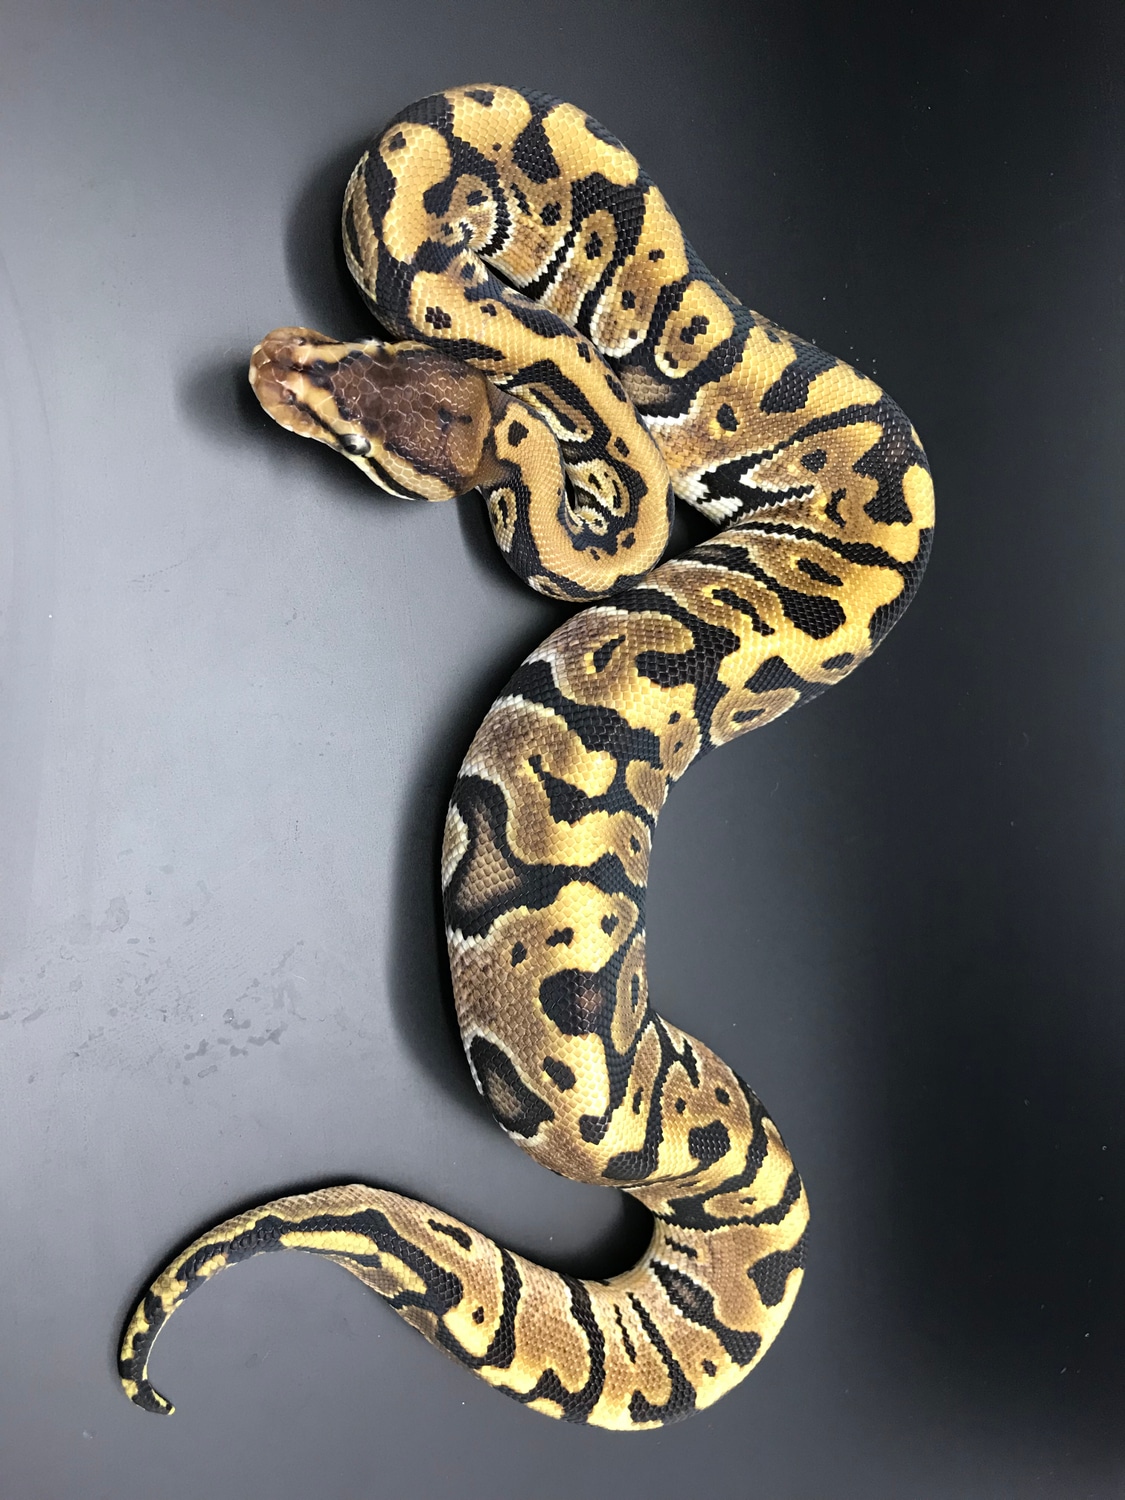 Hidden Gene Woma Ball Python by Wreck room snakes